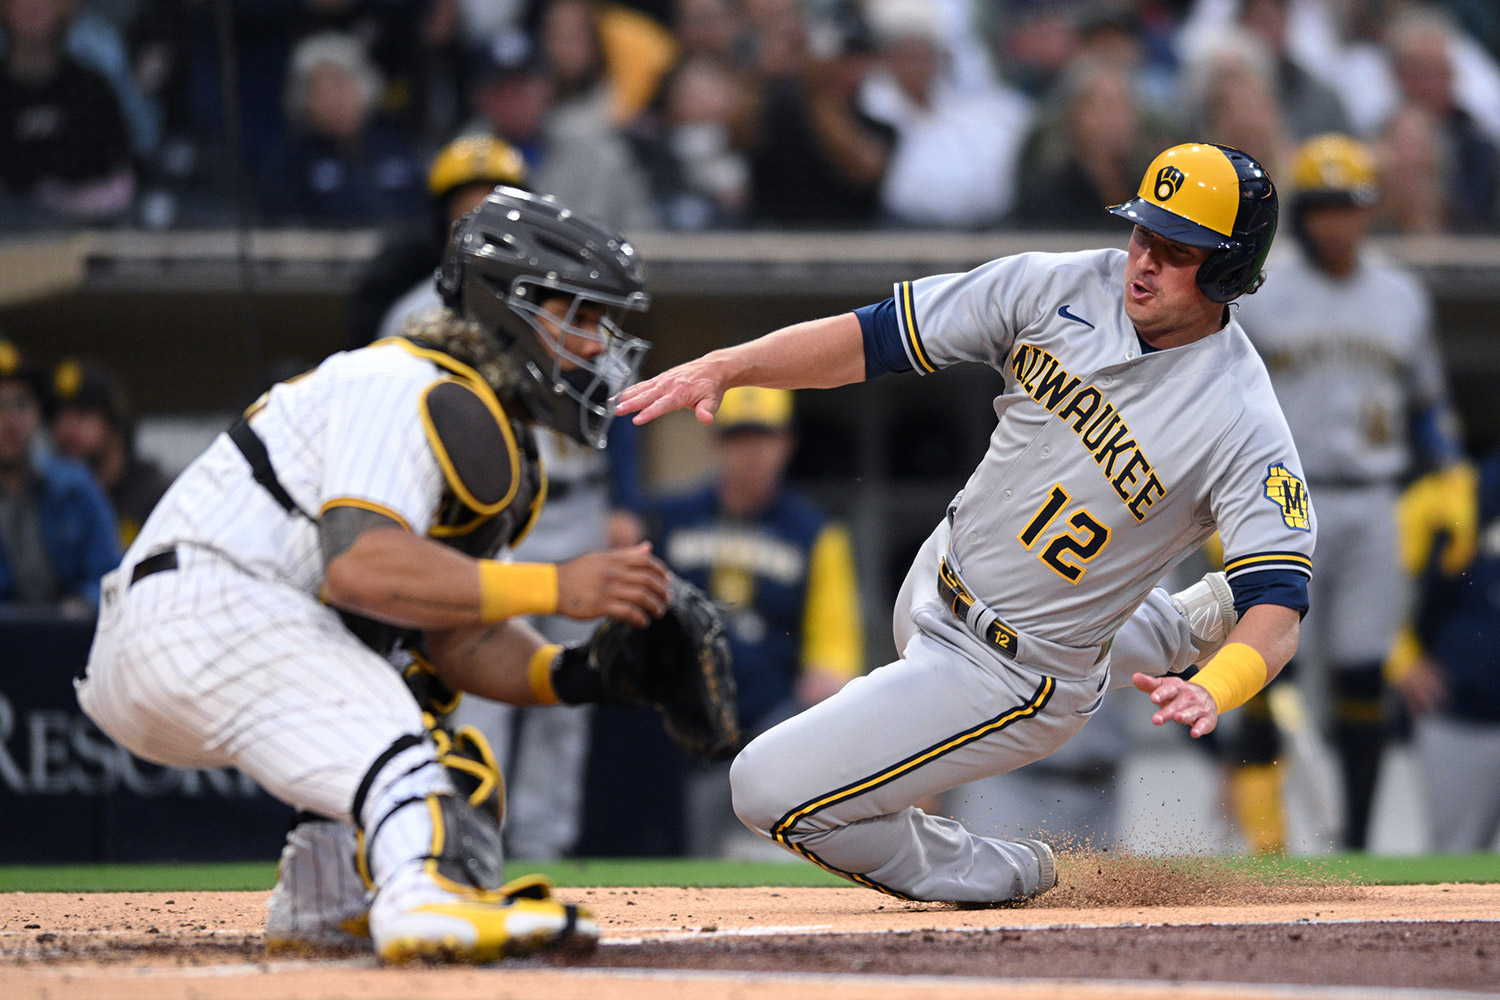 Who did the Brewers get in the Hunter Renfroe trade with the Angels?